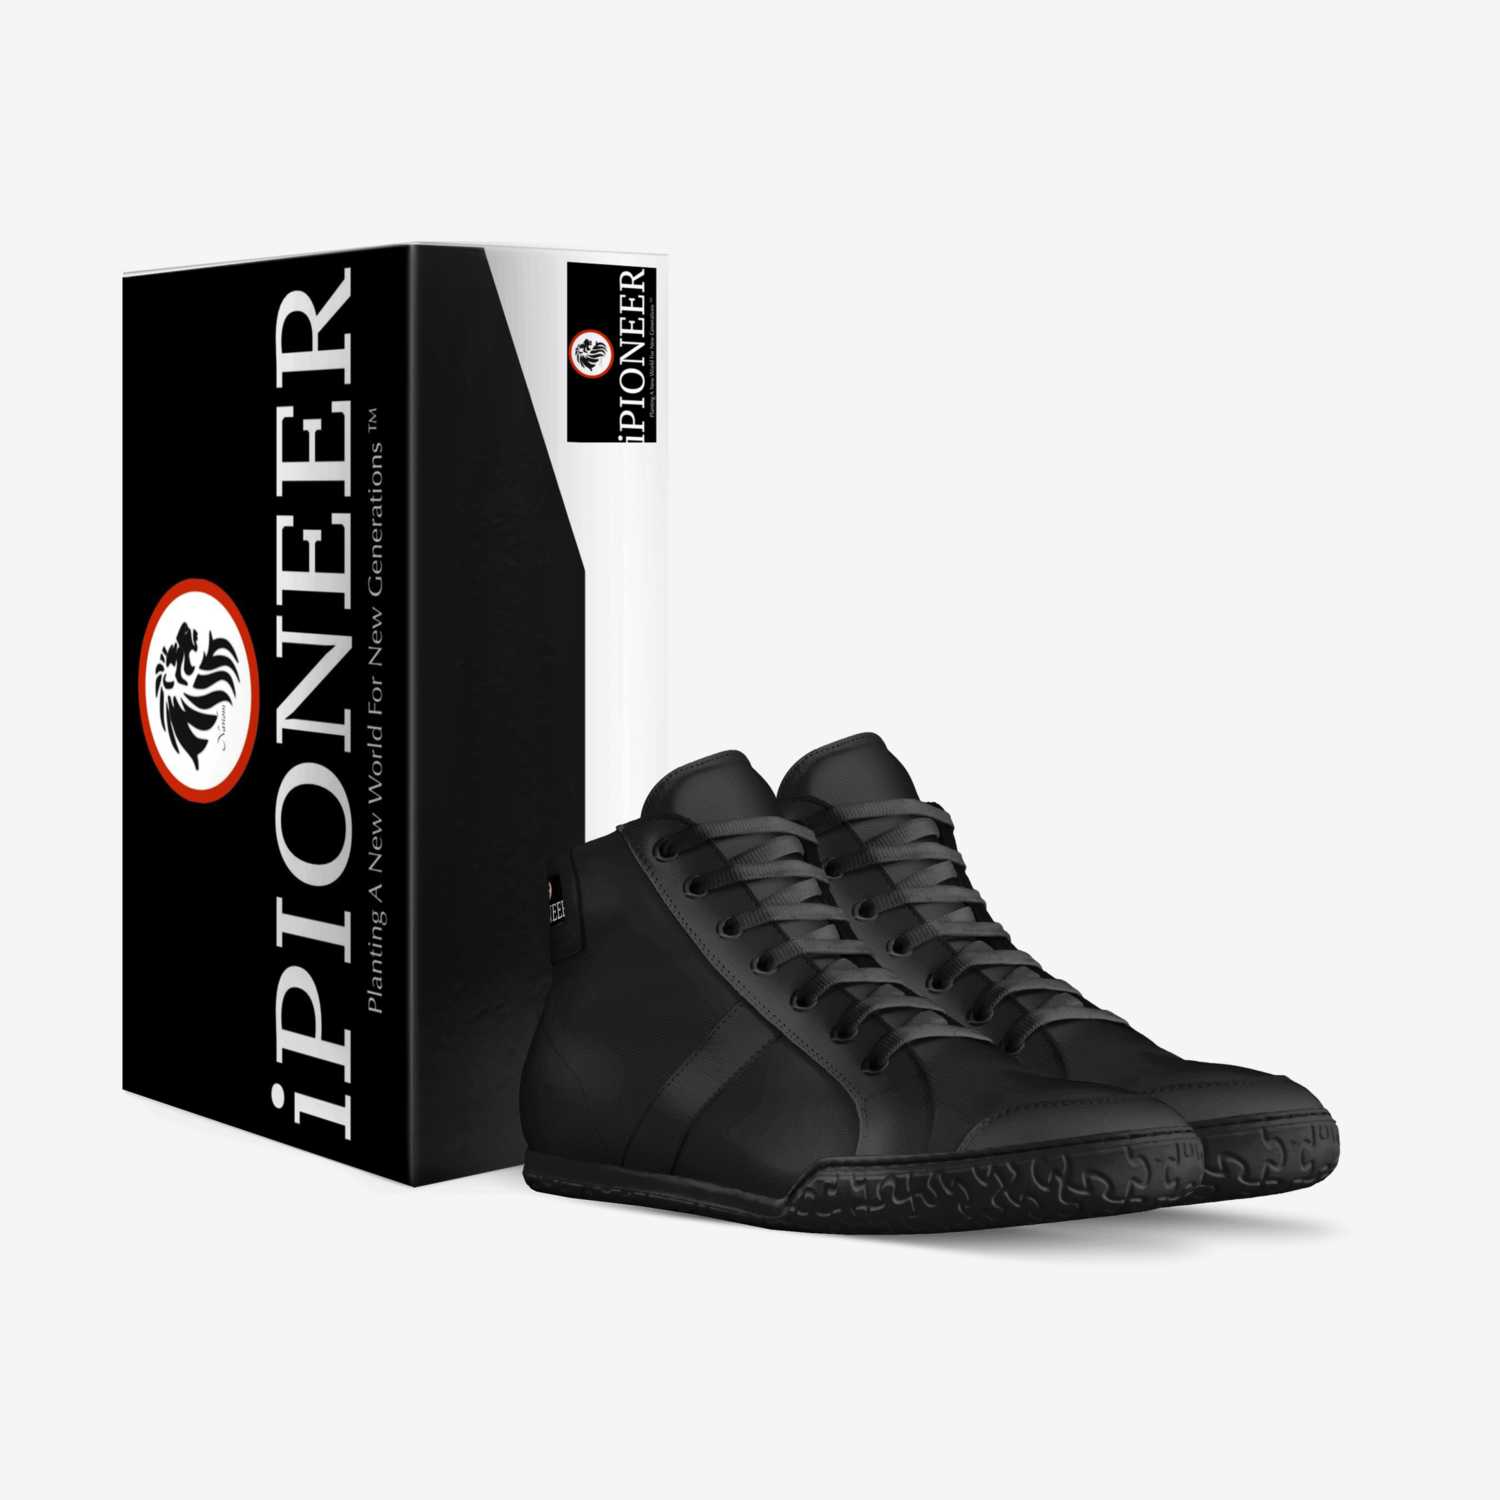 iPioneer custom made in Italy shoes by Marlon D. Hester Sr. | Box view